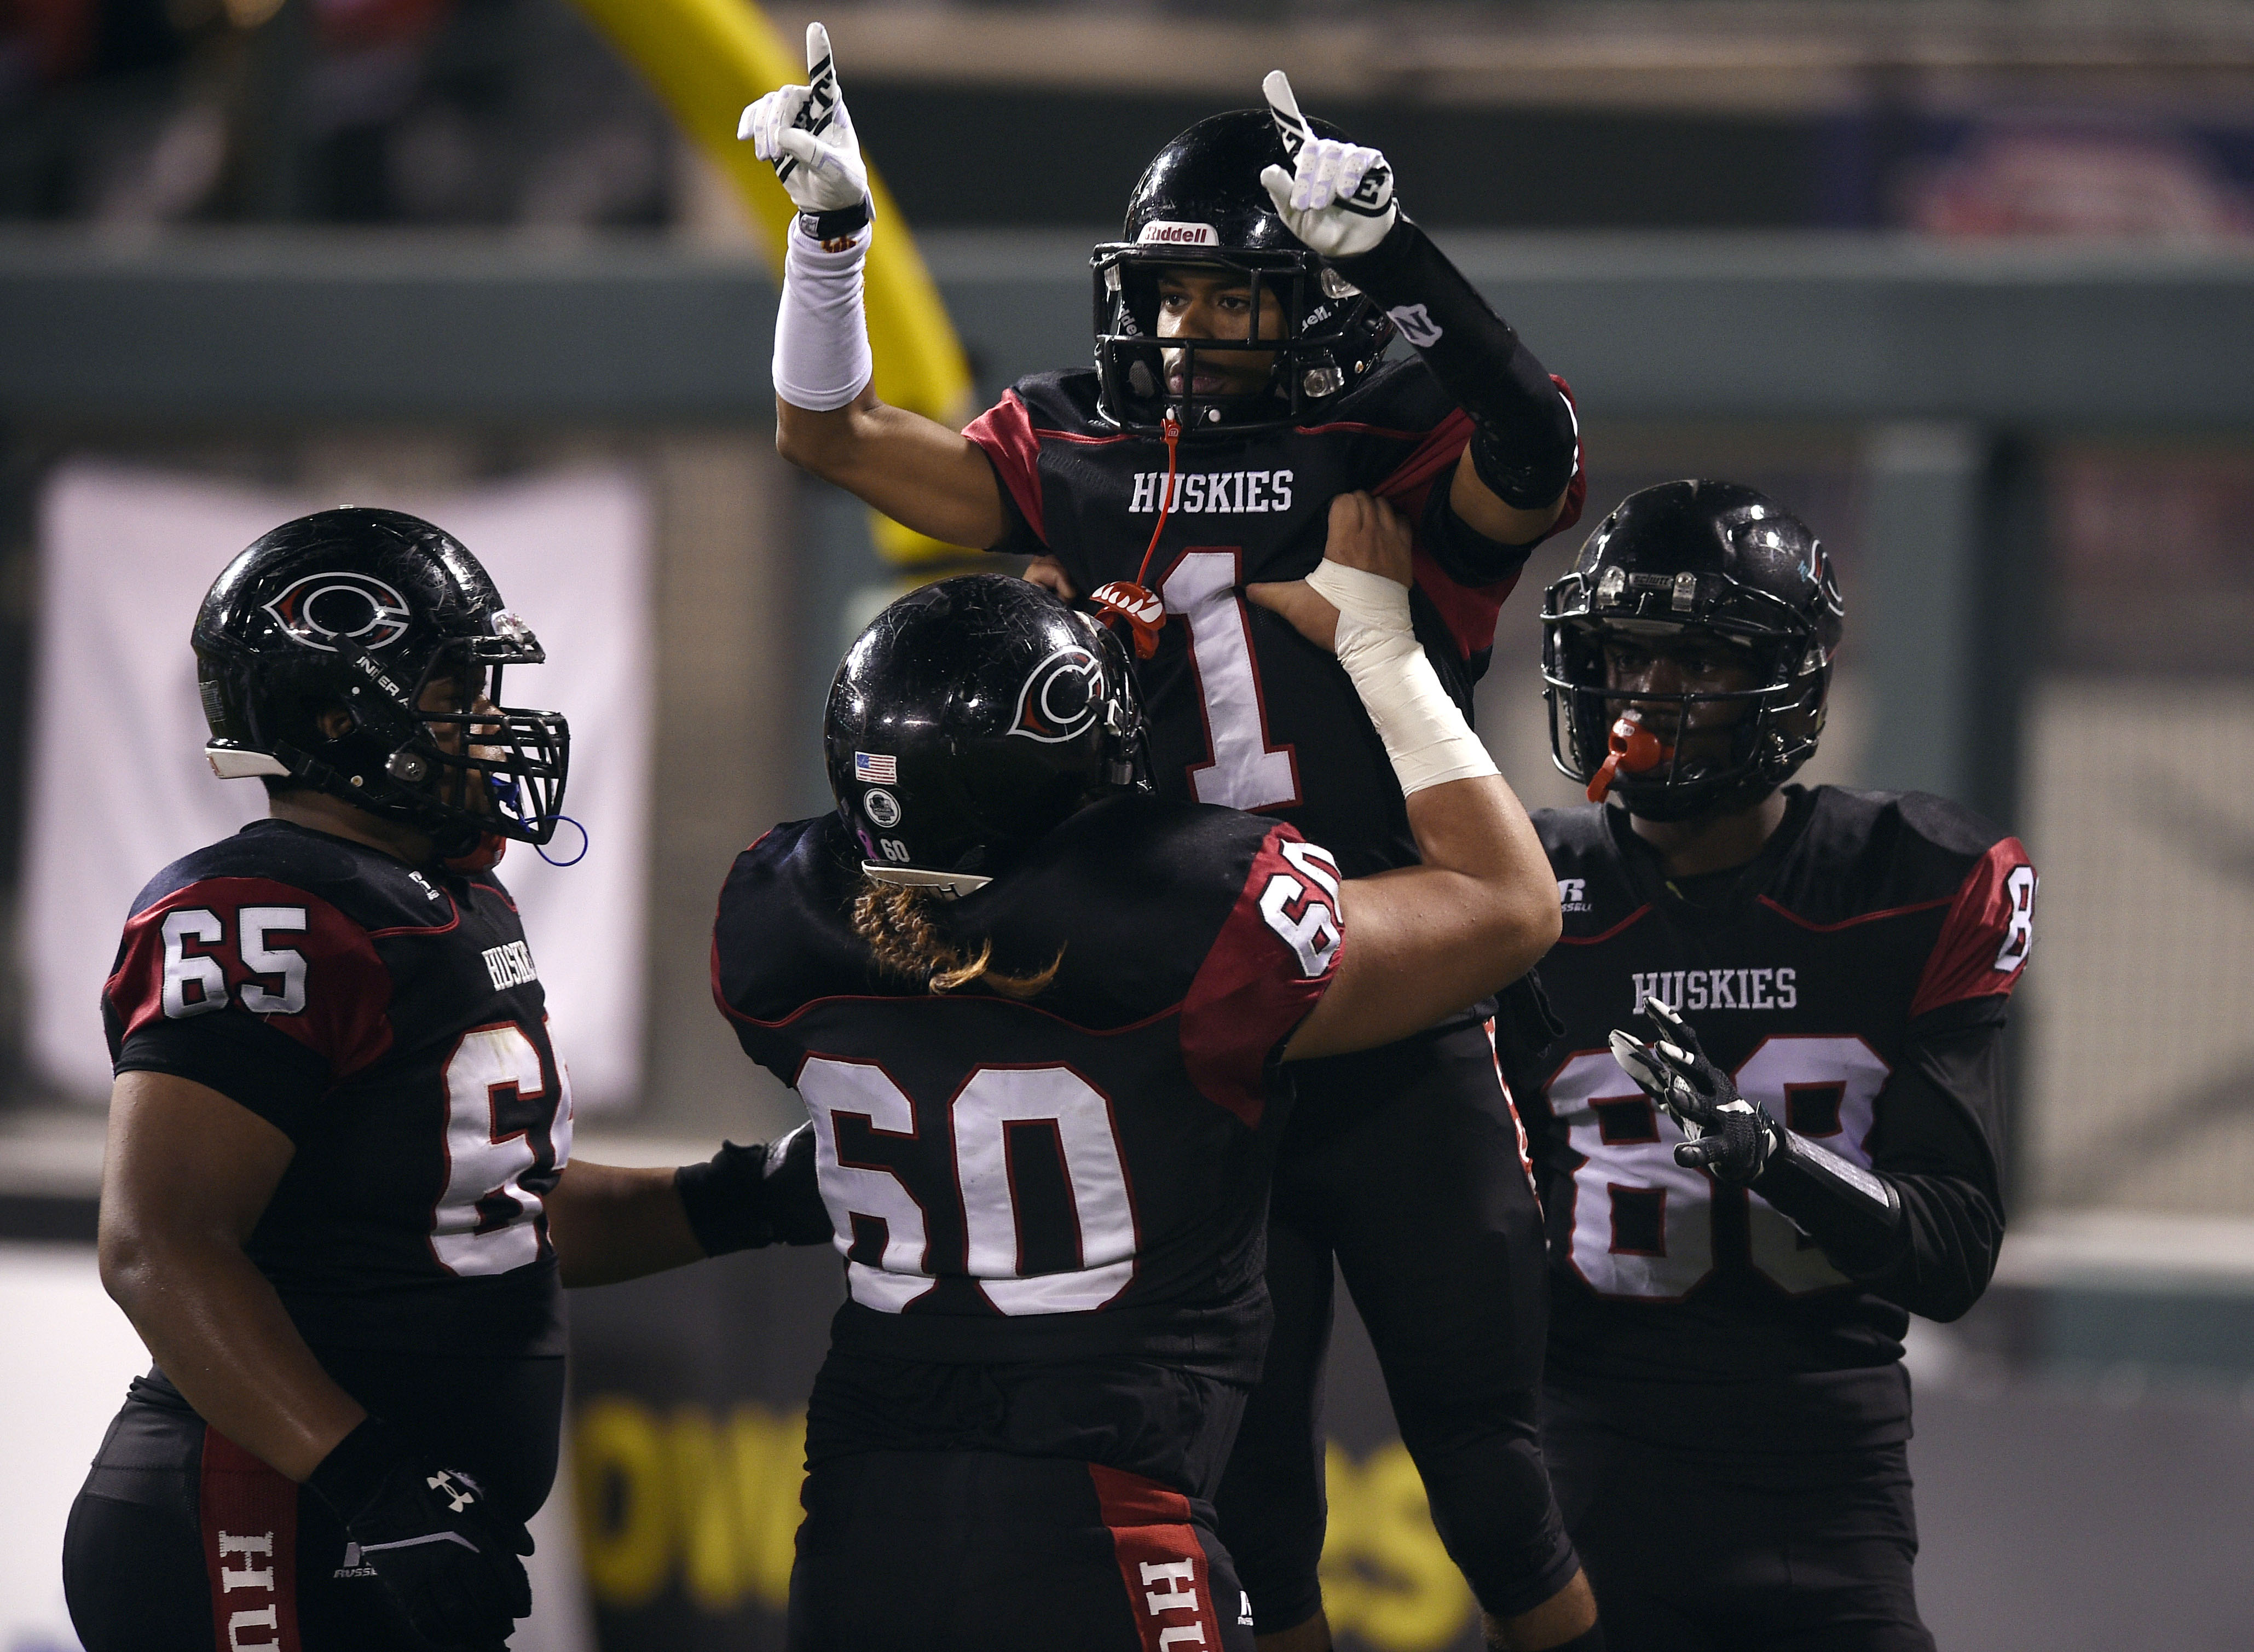 Centennial (Corona, Calif.) wide receiver Cameron Jackson (1) celebrates with teammates after scoring against St. John Bosco. Centennial plays its 15th game of the season against De La Salle (Concord) this weekend . (Photo: Kelvin Kuo, USA TODAY Sports) 